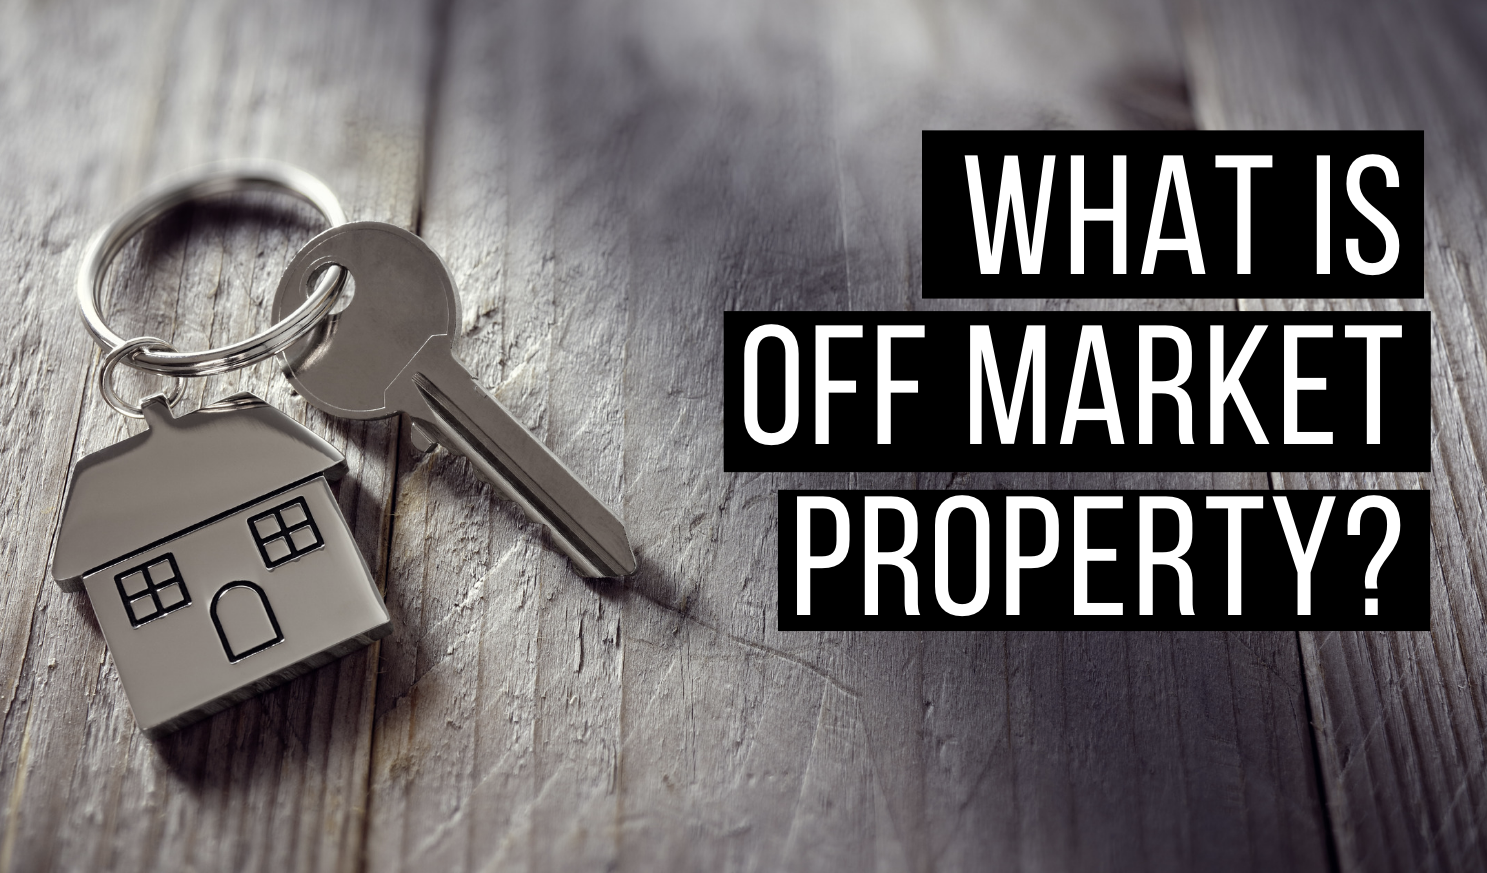 In real estate what does off market mean